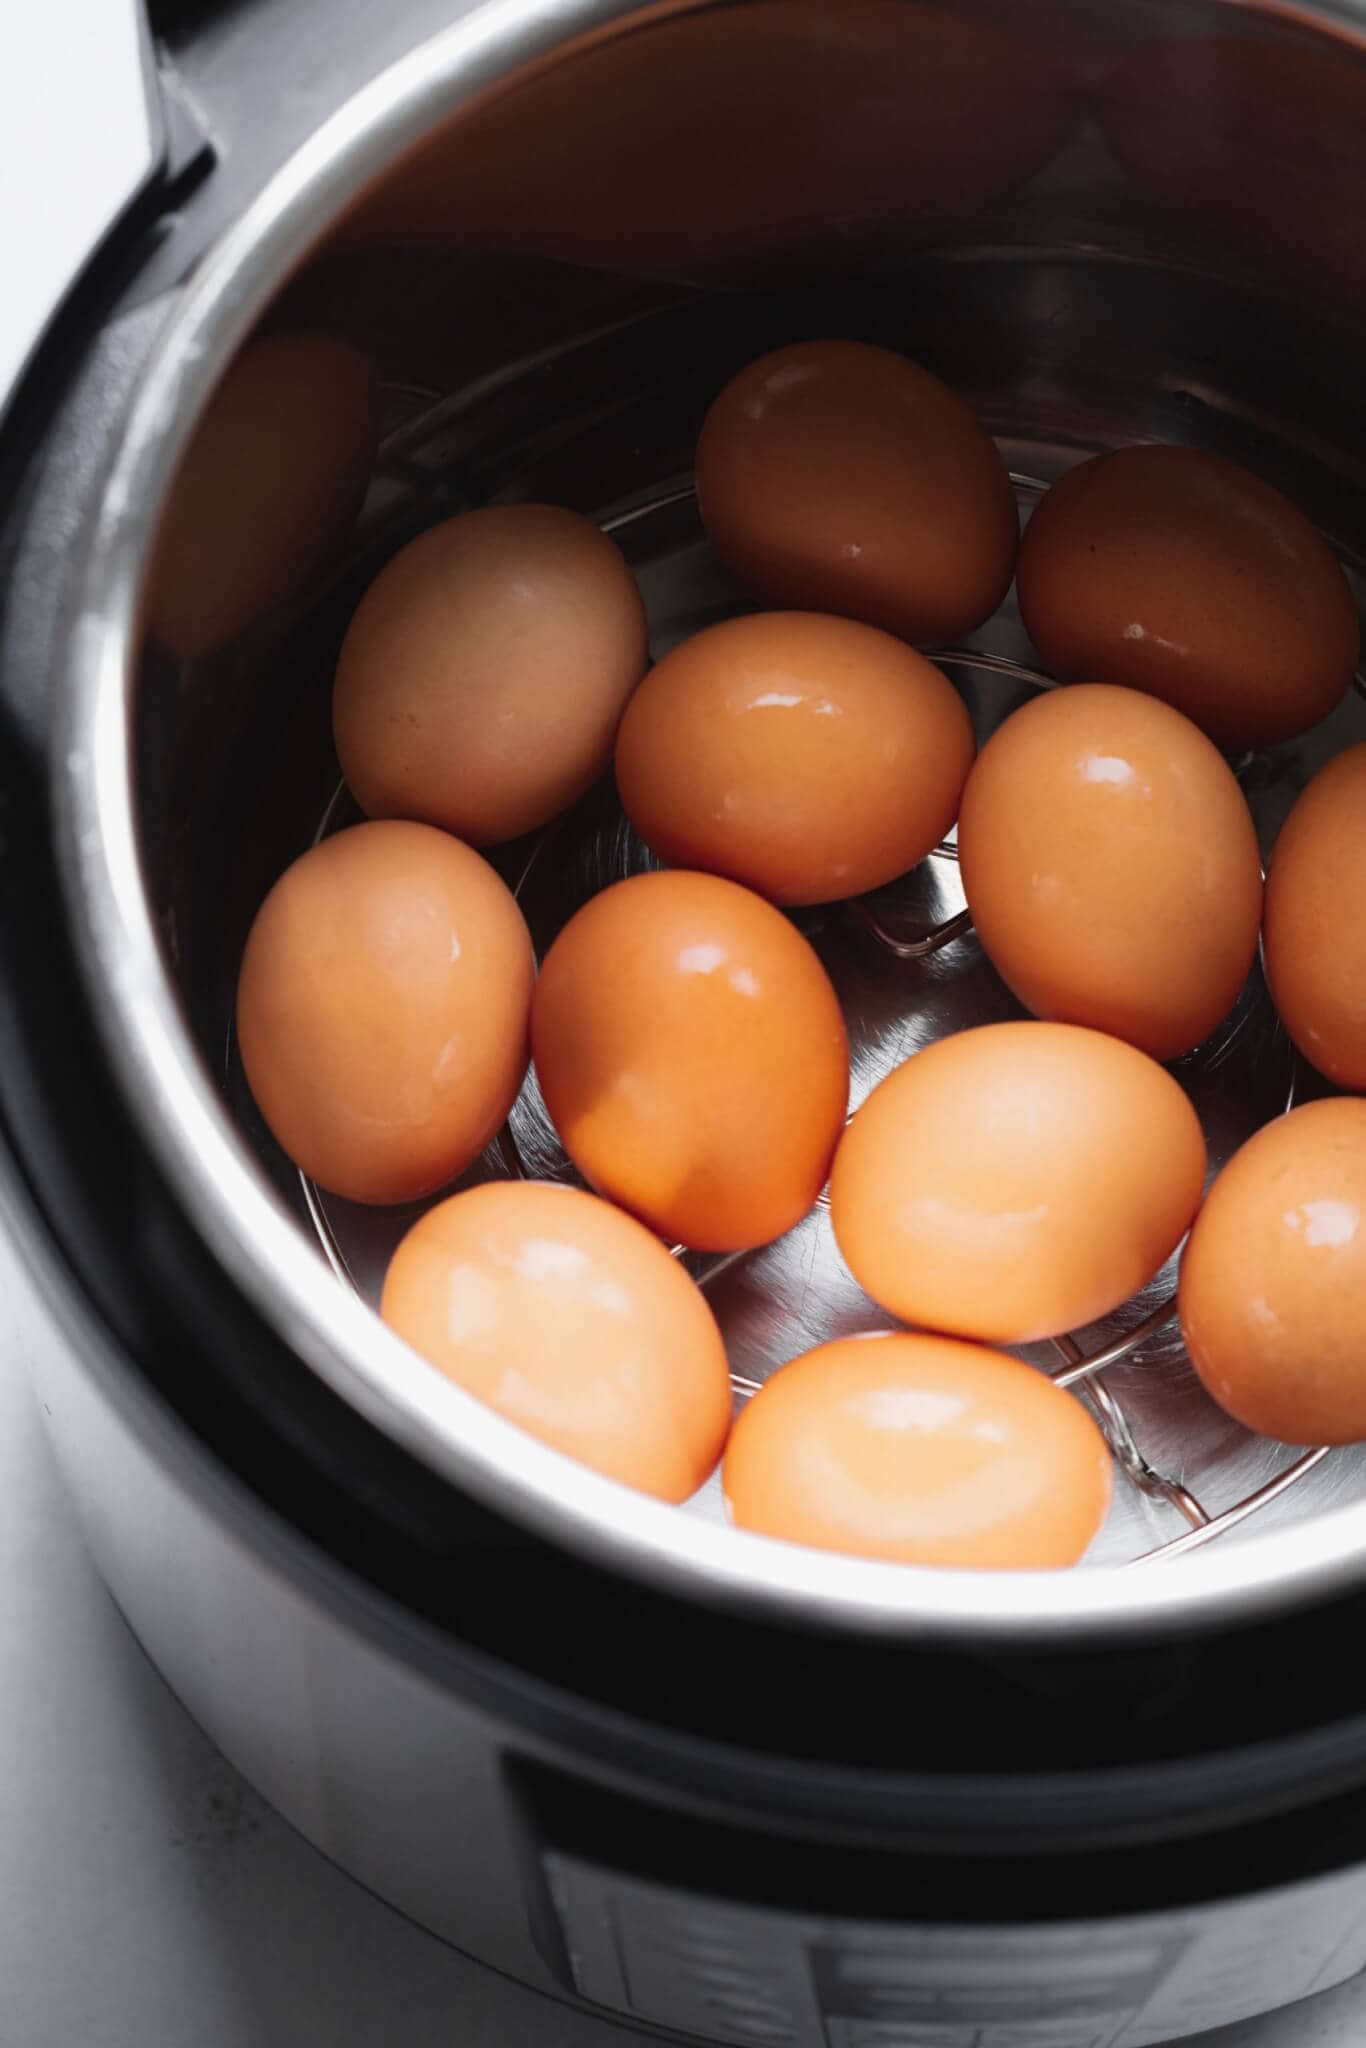 Eggs in the instant pot on a metal trivet.